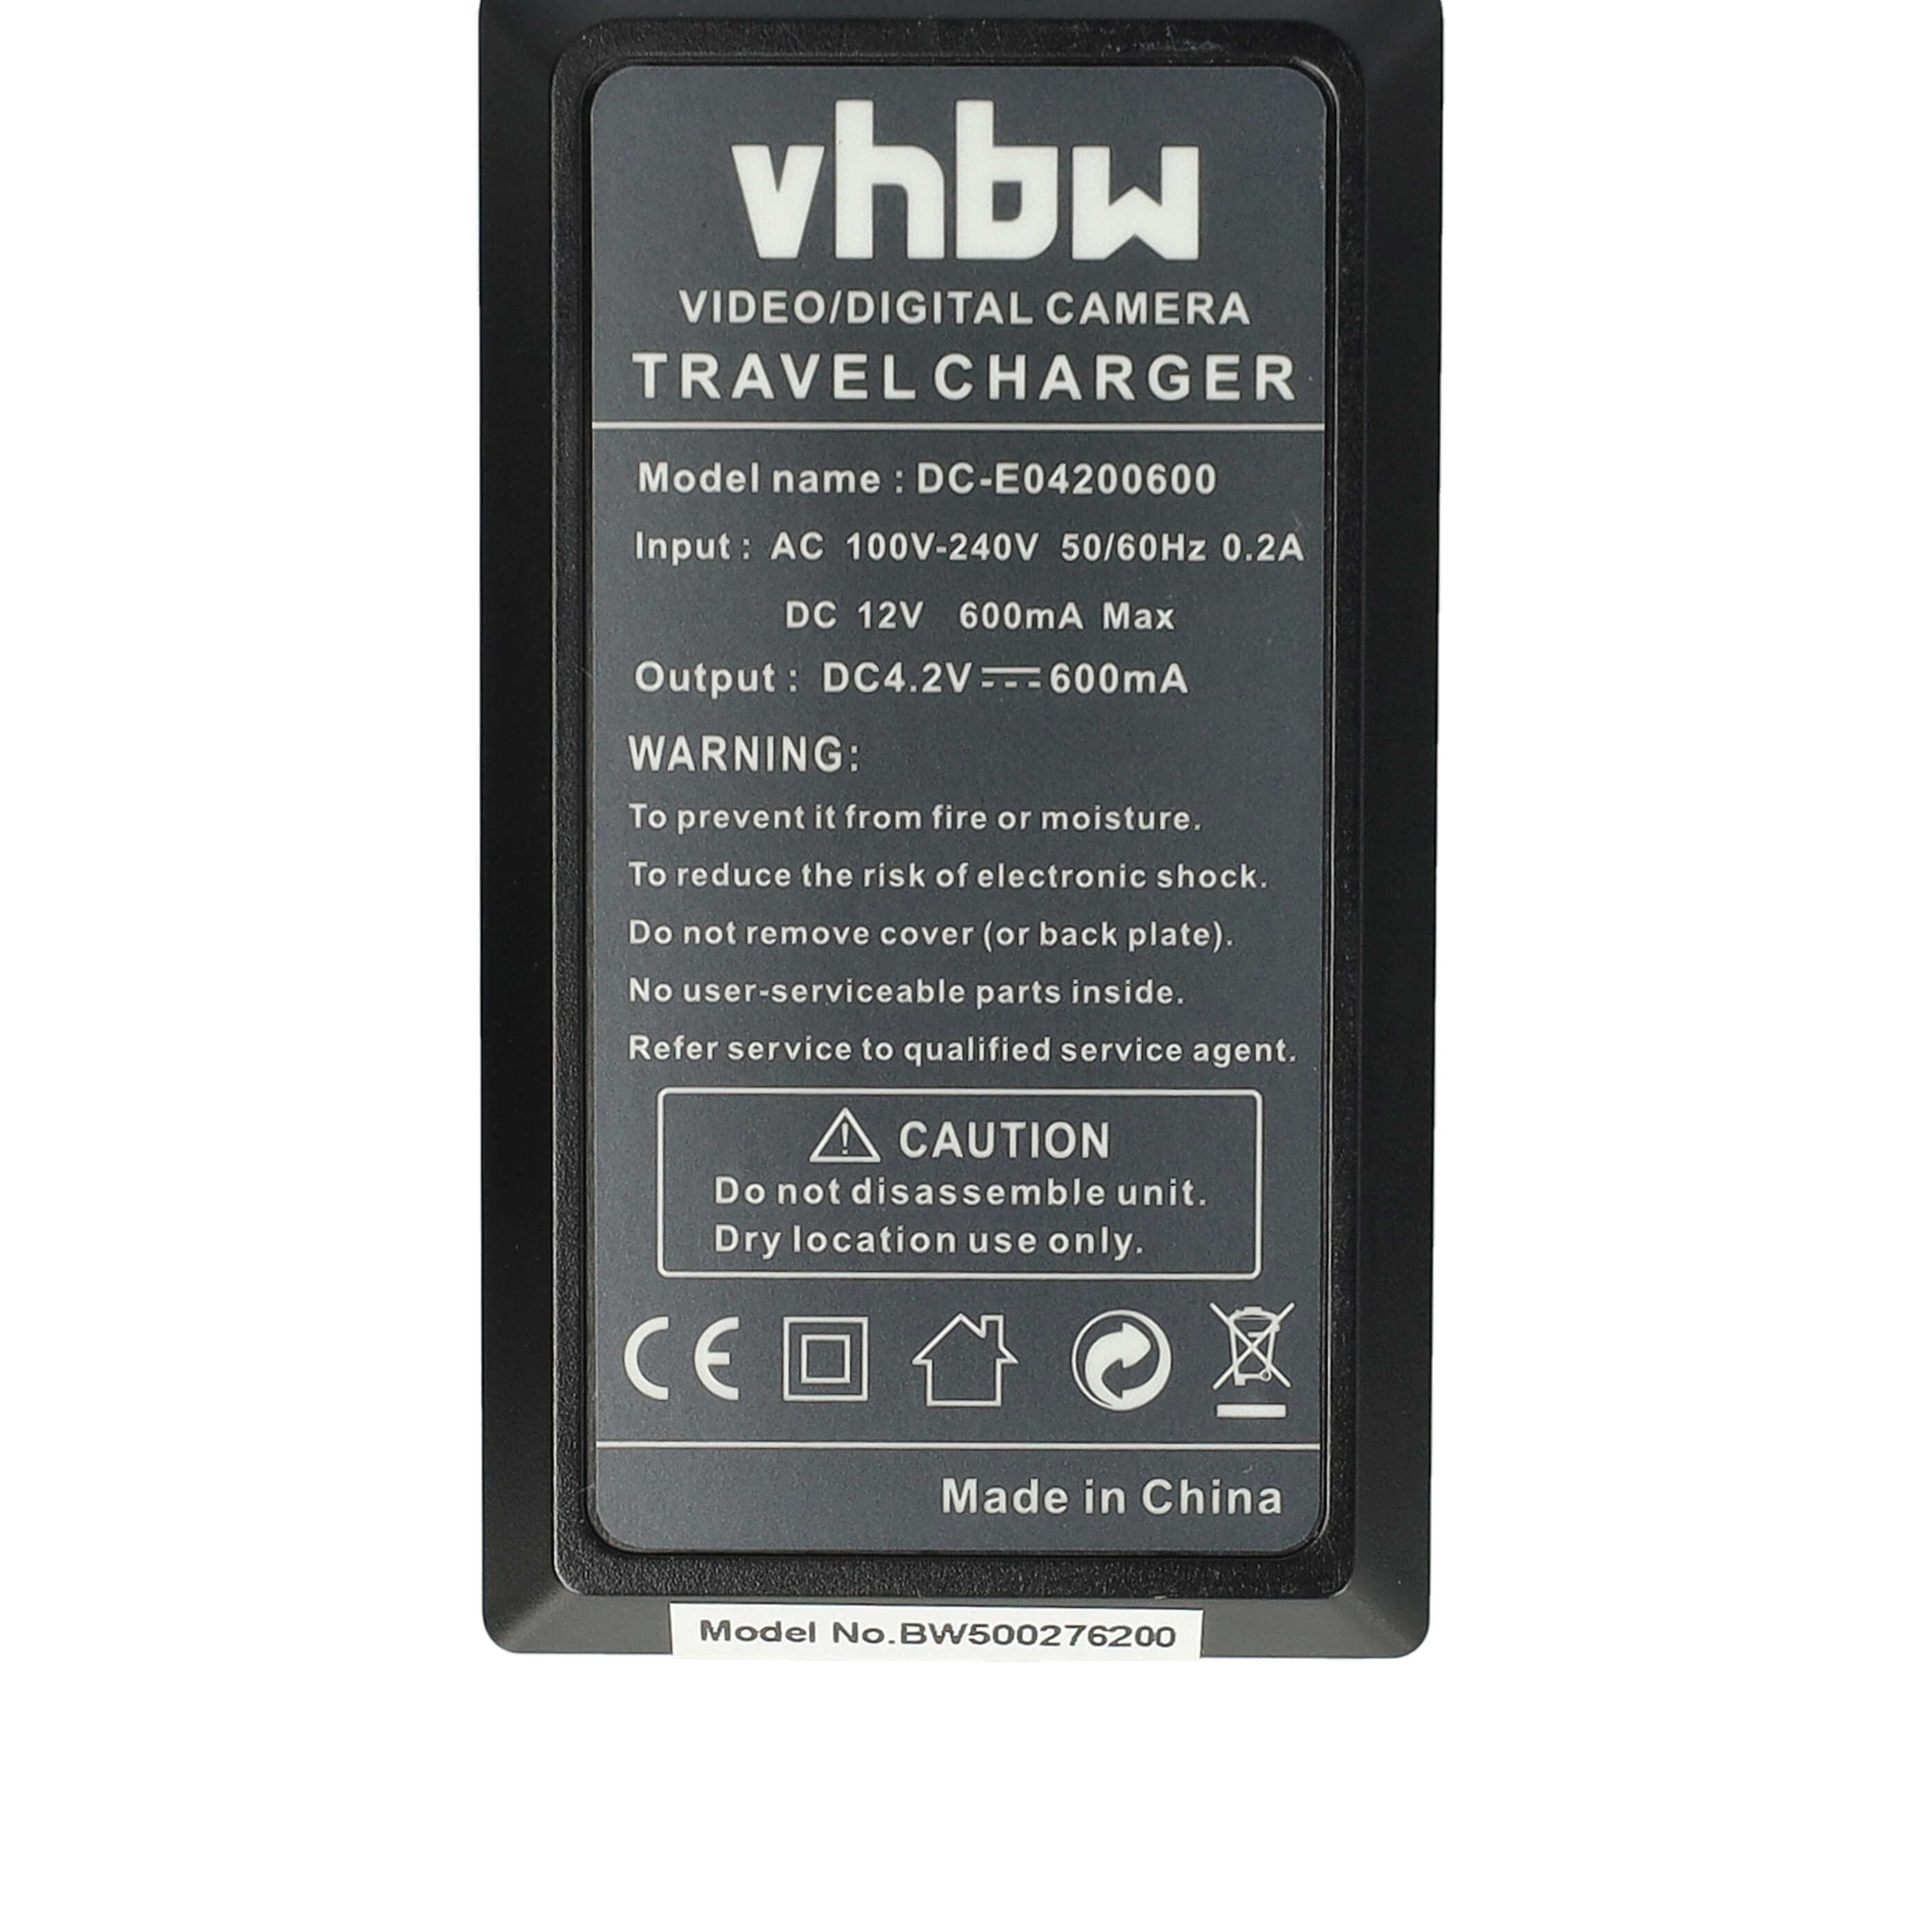 Battery Charger suitable for Fuji NP-70 Camera etc. - 0.6 A, 4.2 V